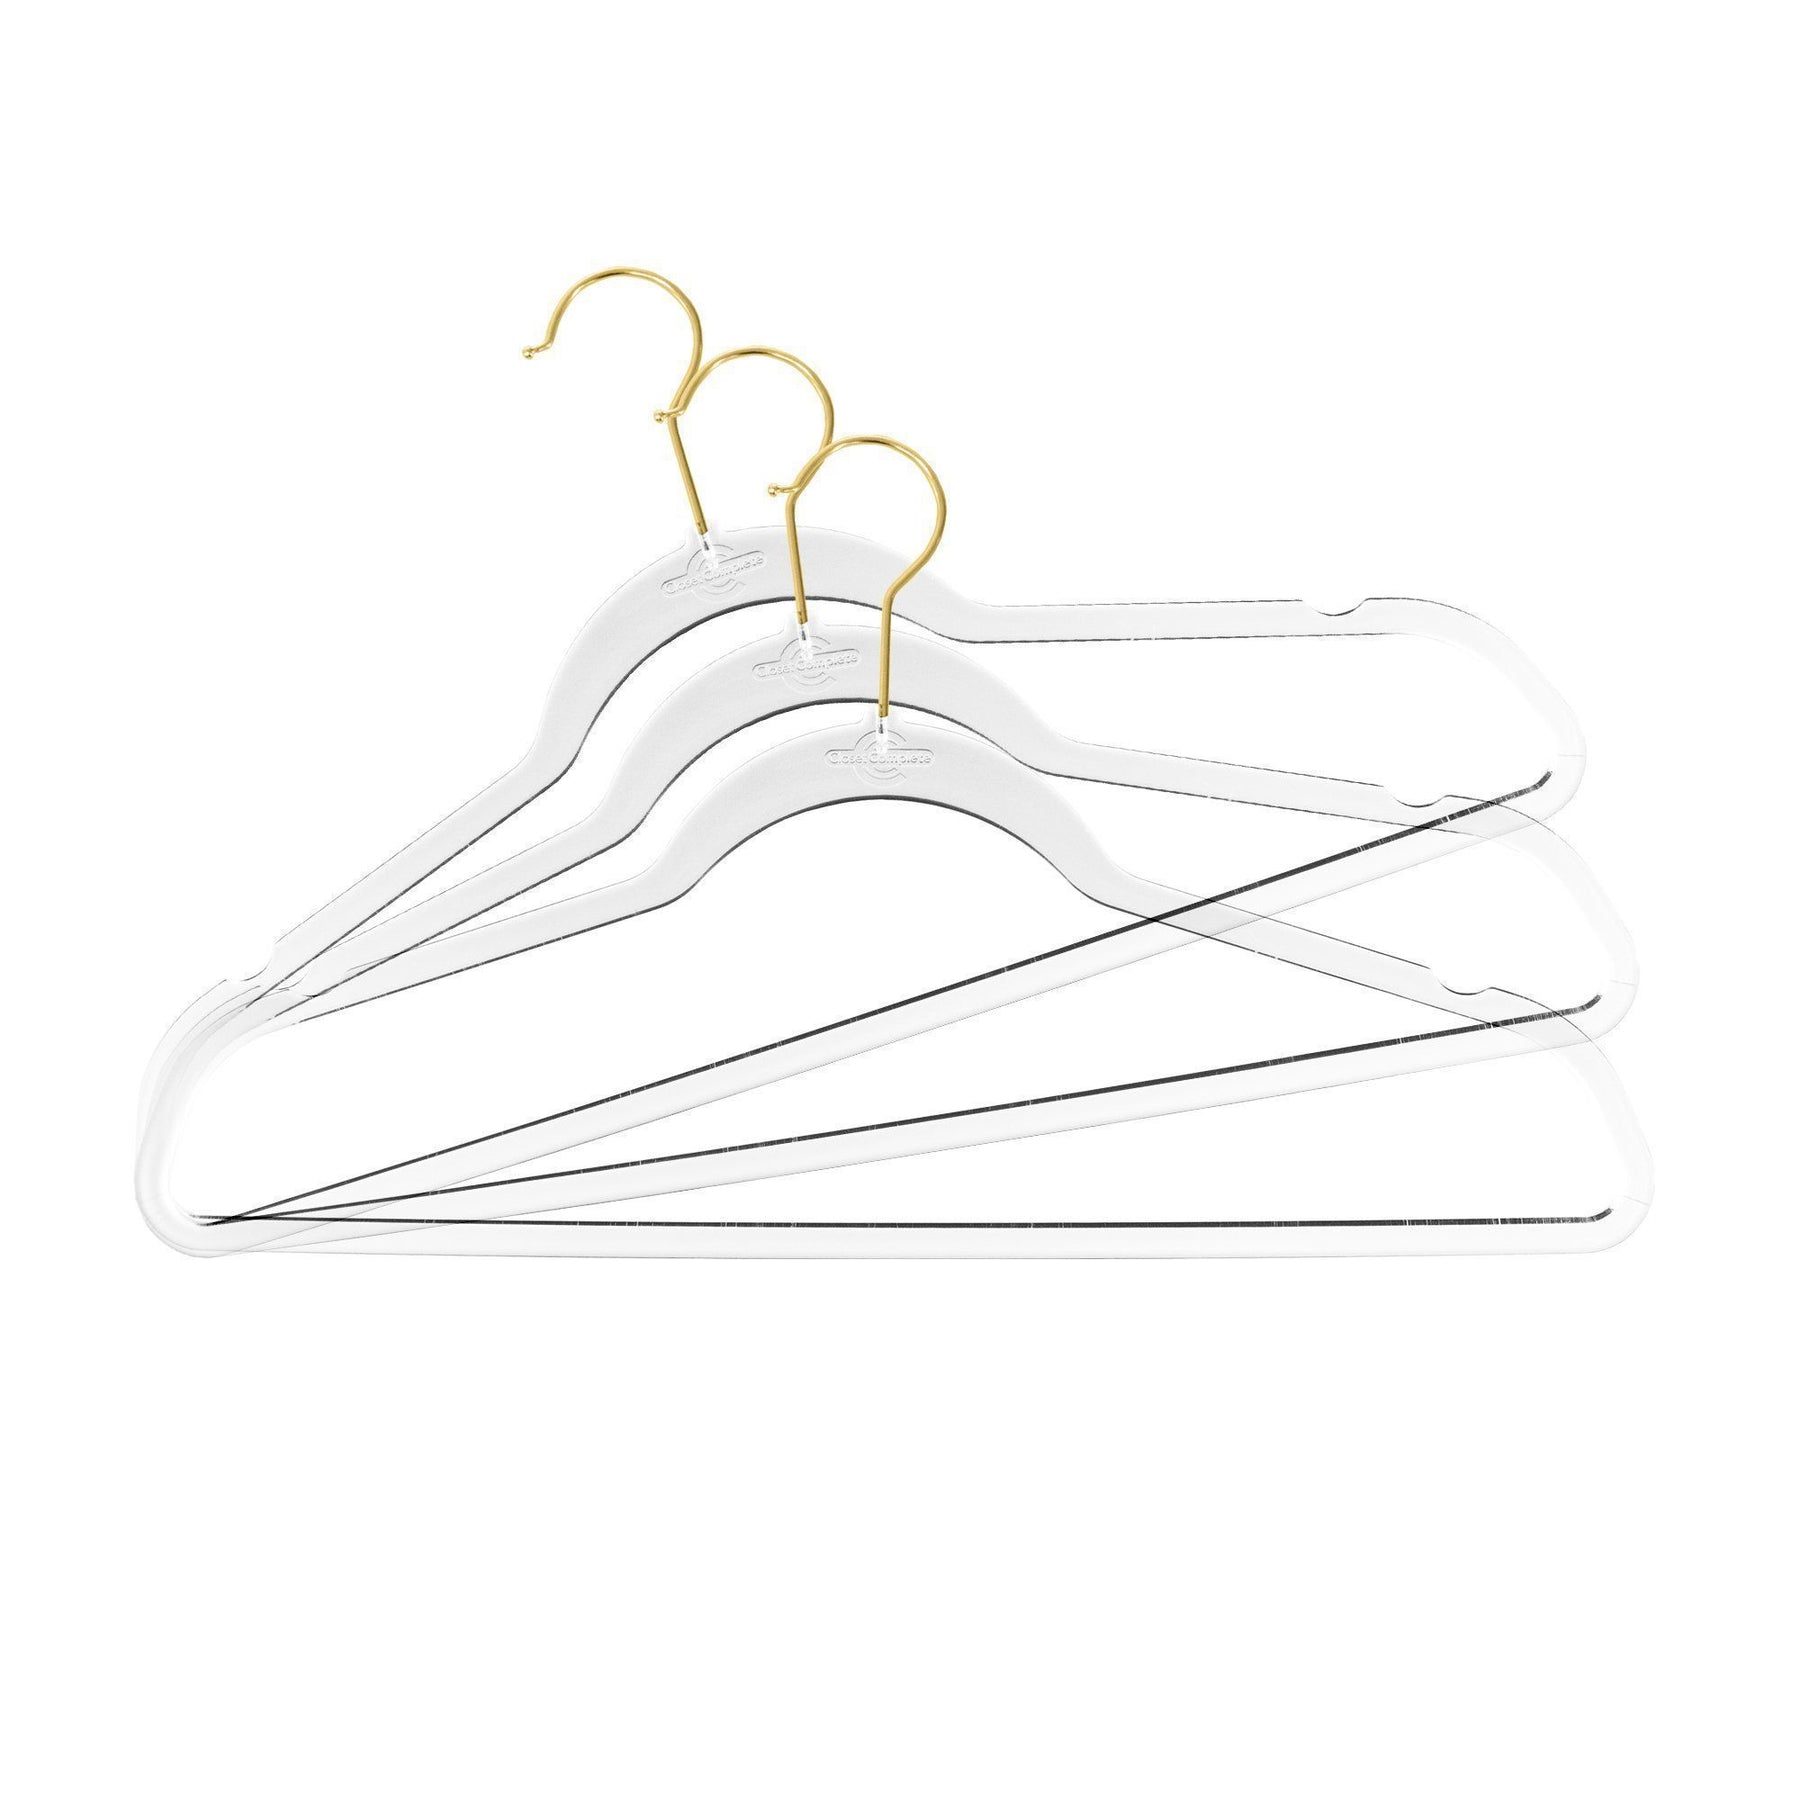 Quality Hangers 5 Pack 12.5 Inches Kids Size Acrylic Hangers – Crystal Clear Hangers for Kids Clothes 7-10 Years Old with Wide Gloss Gold Metallic